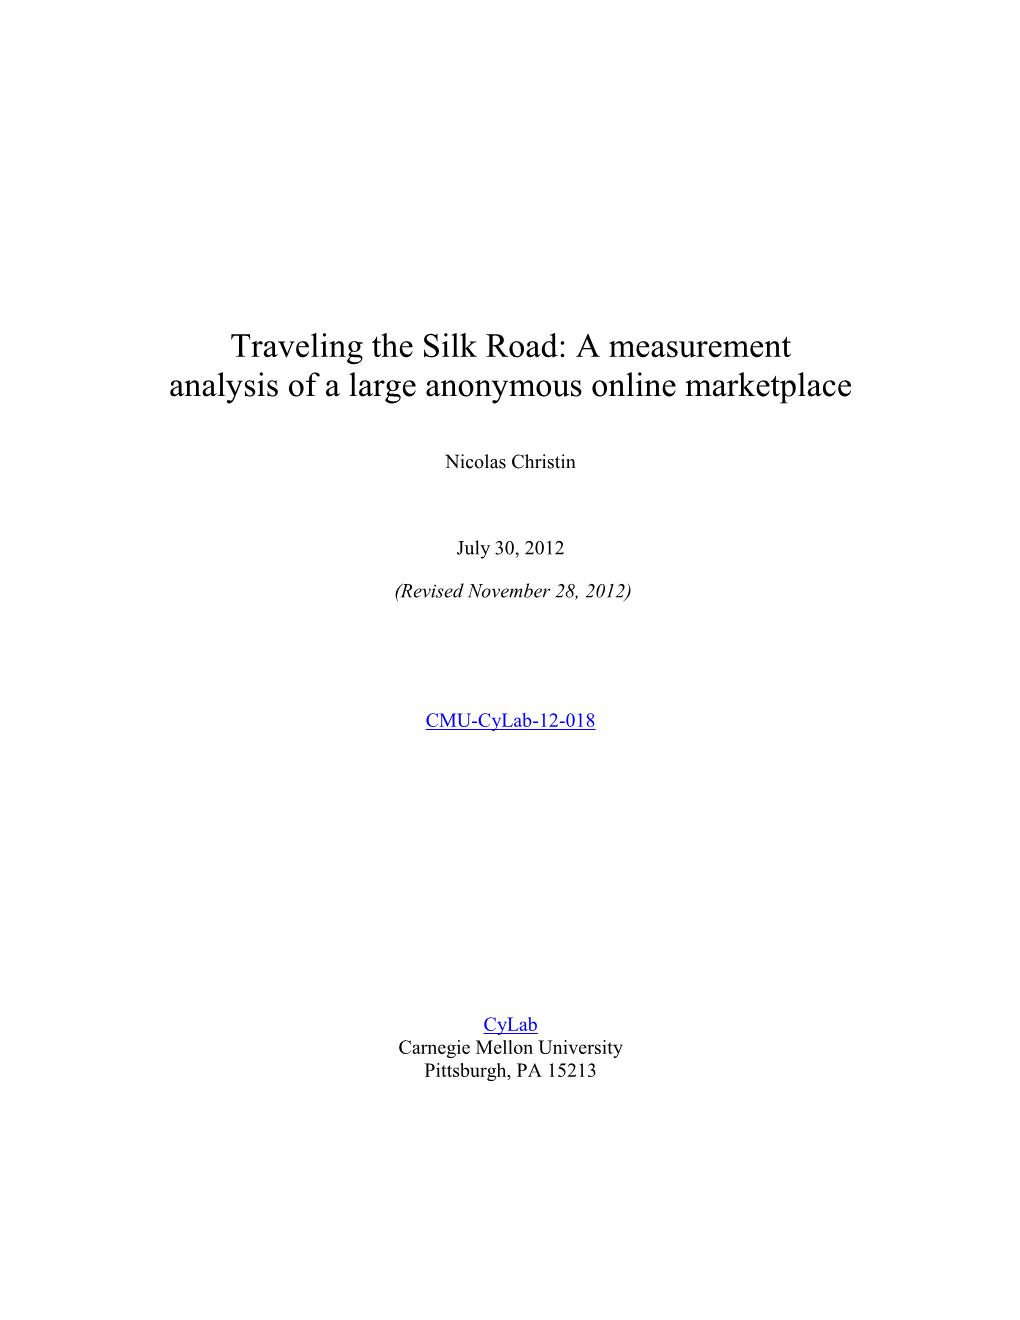 Traveling the Silk Road: a Measurement Analysis of a Large Anonymous Online Marketplace